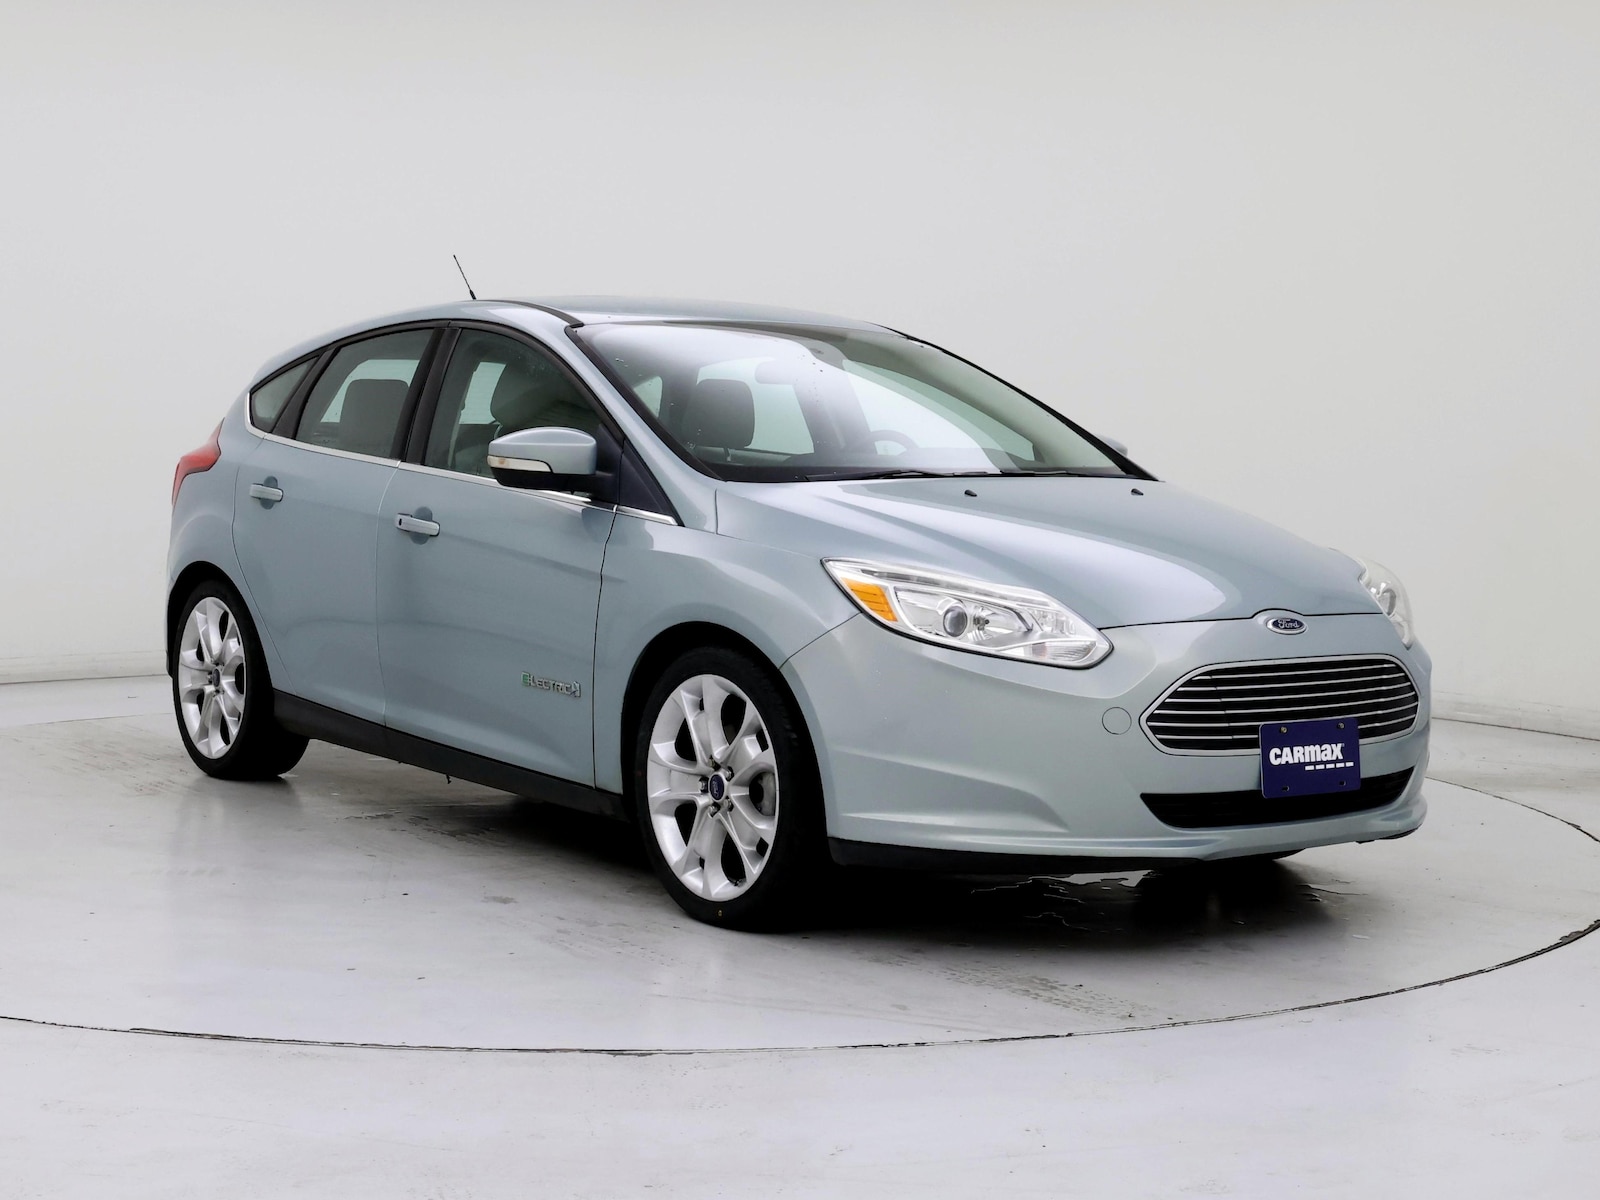 Used 2013 Ford Focus Electric with VIN 1FADP3R44DL126019 for sale in Kenosha, WI